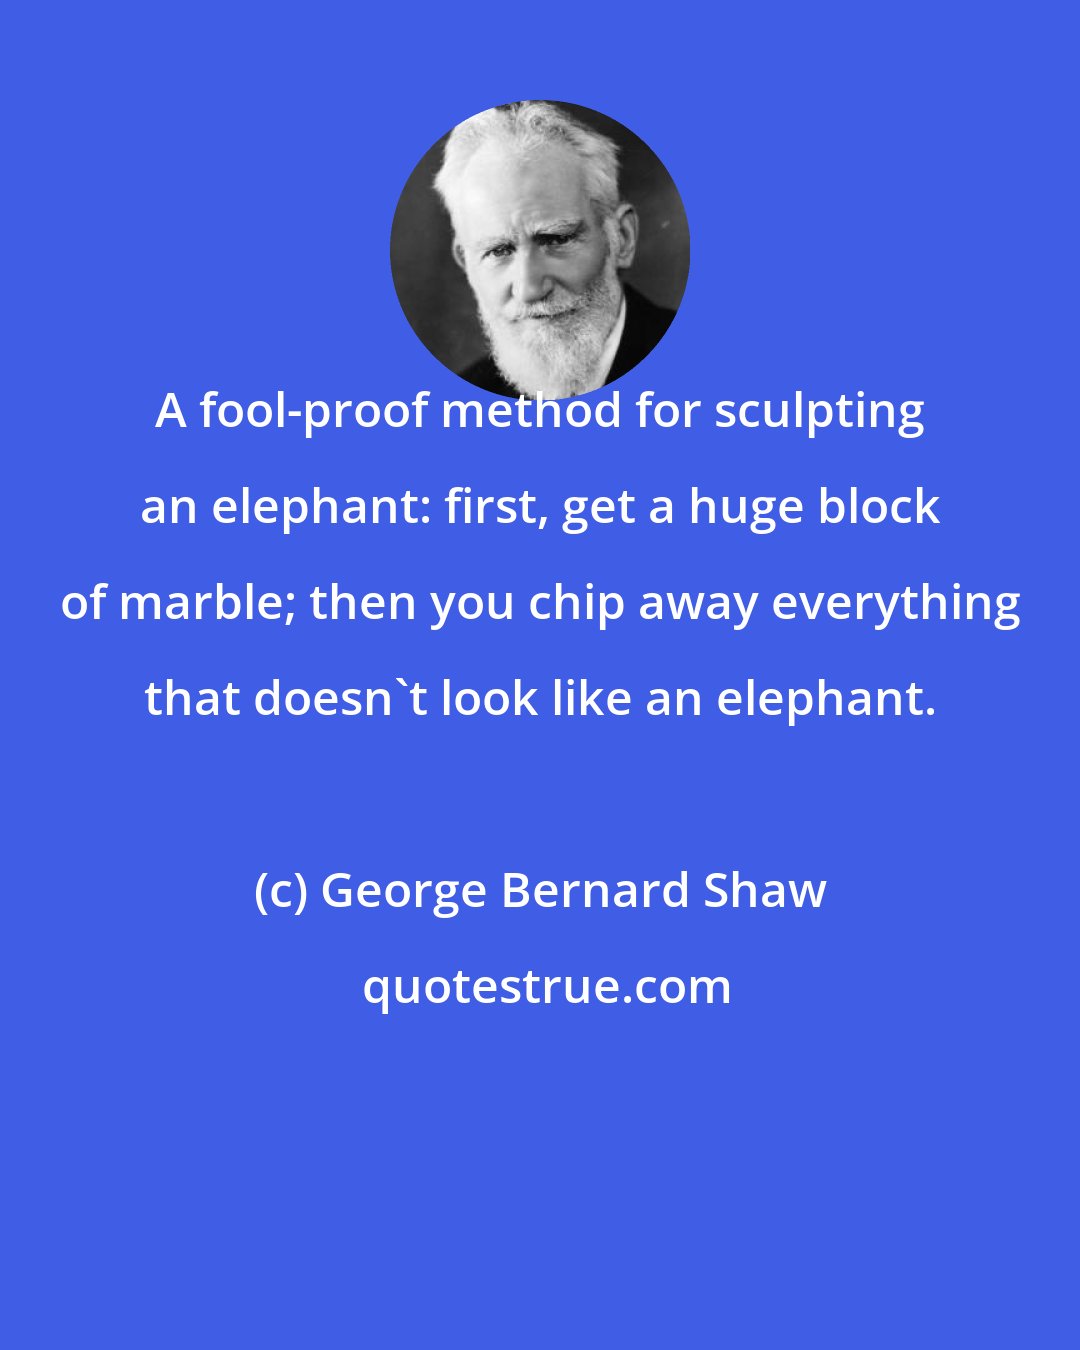 George Bernard Shaw: A fool-proof method for sculpting an elephant: first, get a huge block of marble; then you chip away everything that doesn't look like an elephant.